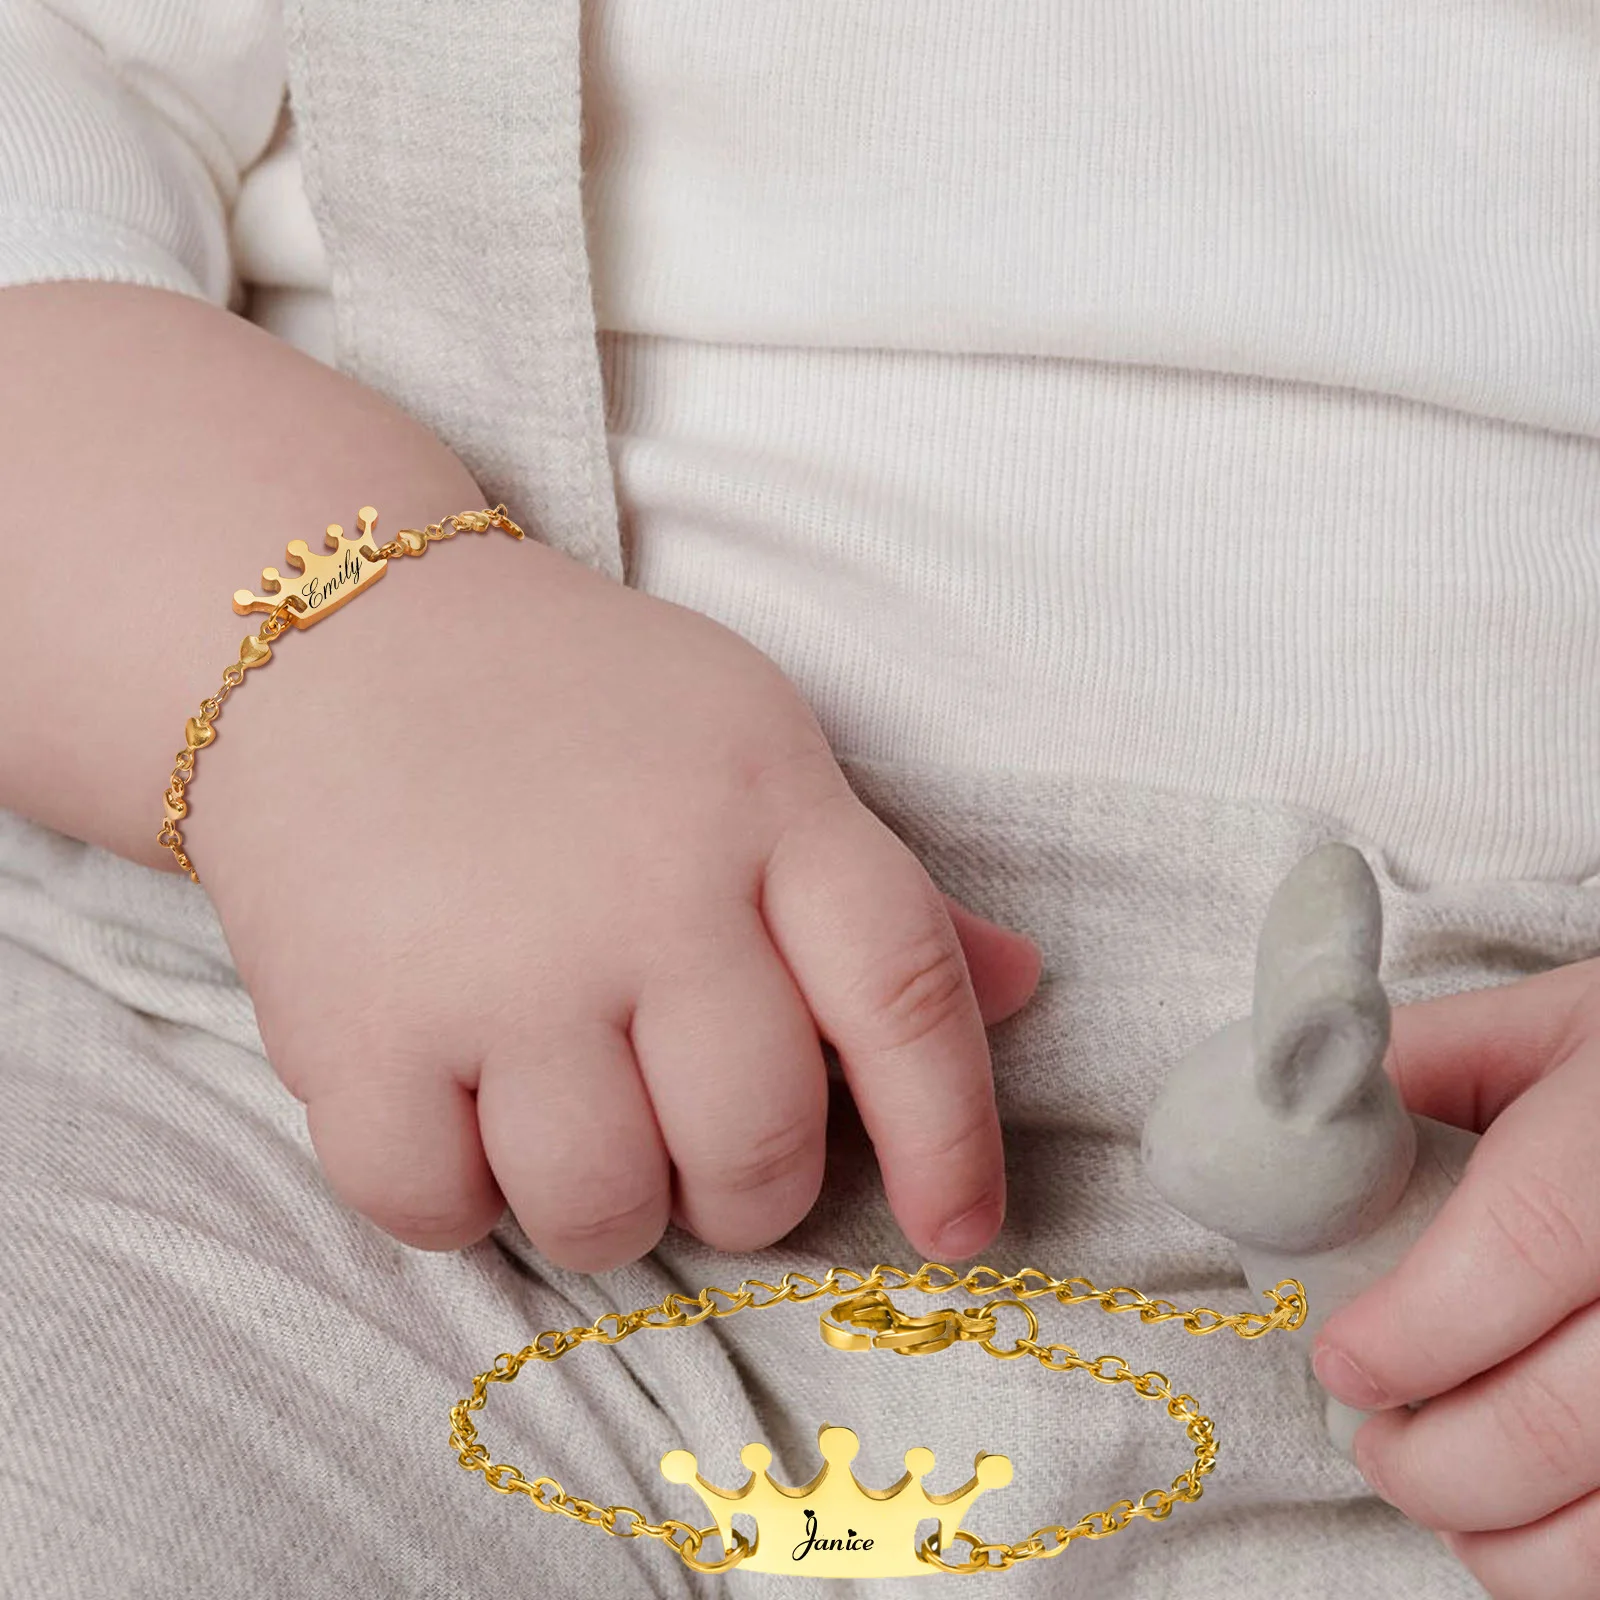 Personalized Name Crown Bracelet for Baby Children Kids, Customized ID Bangle, Stainless Steel Not Allergic Birthday Gift